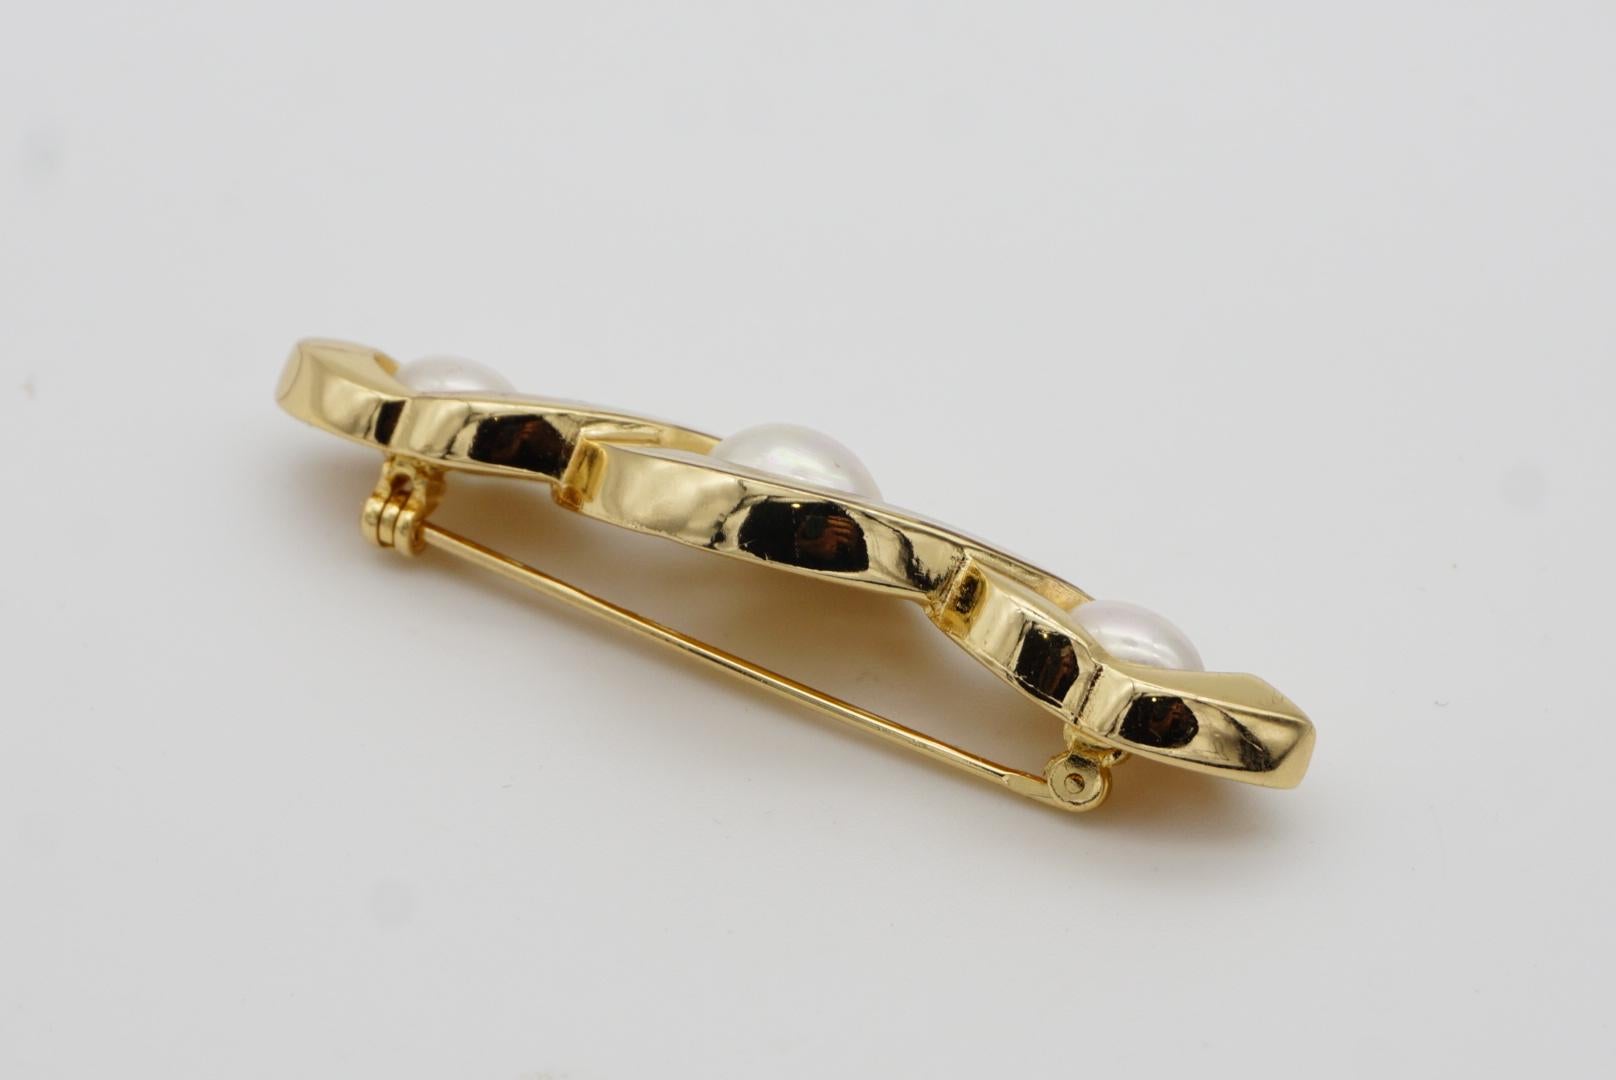 Christian Dior Vintage 1980s Trio White Pearls Croissant Twist Bar Gold Brooch For Sale 4